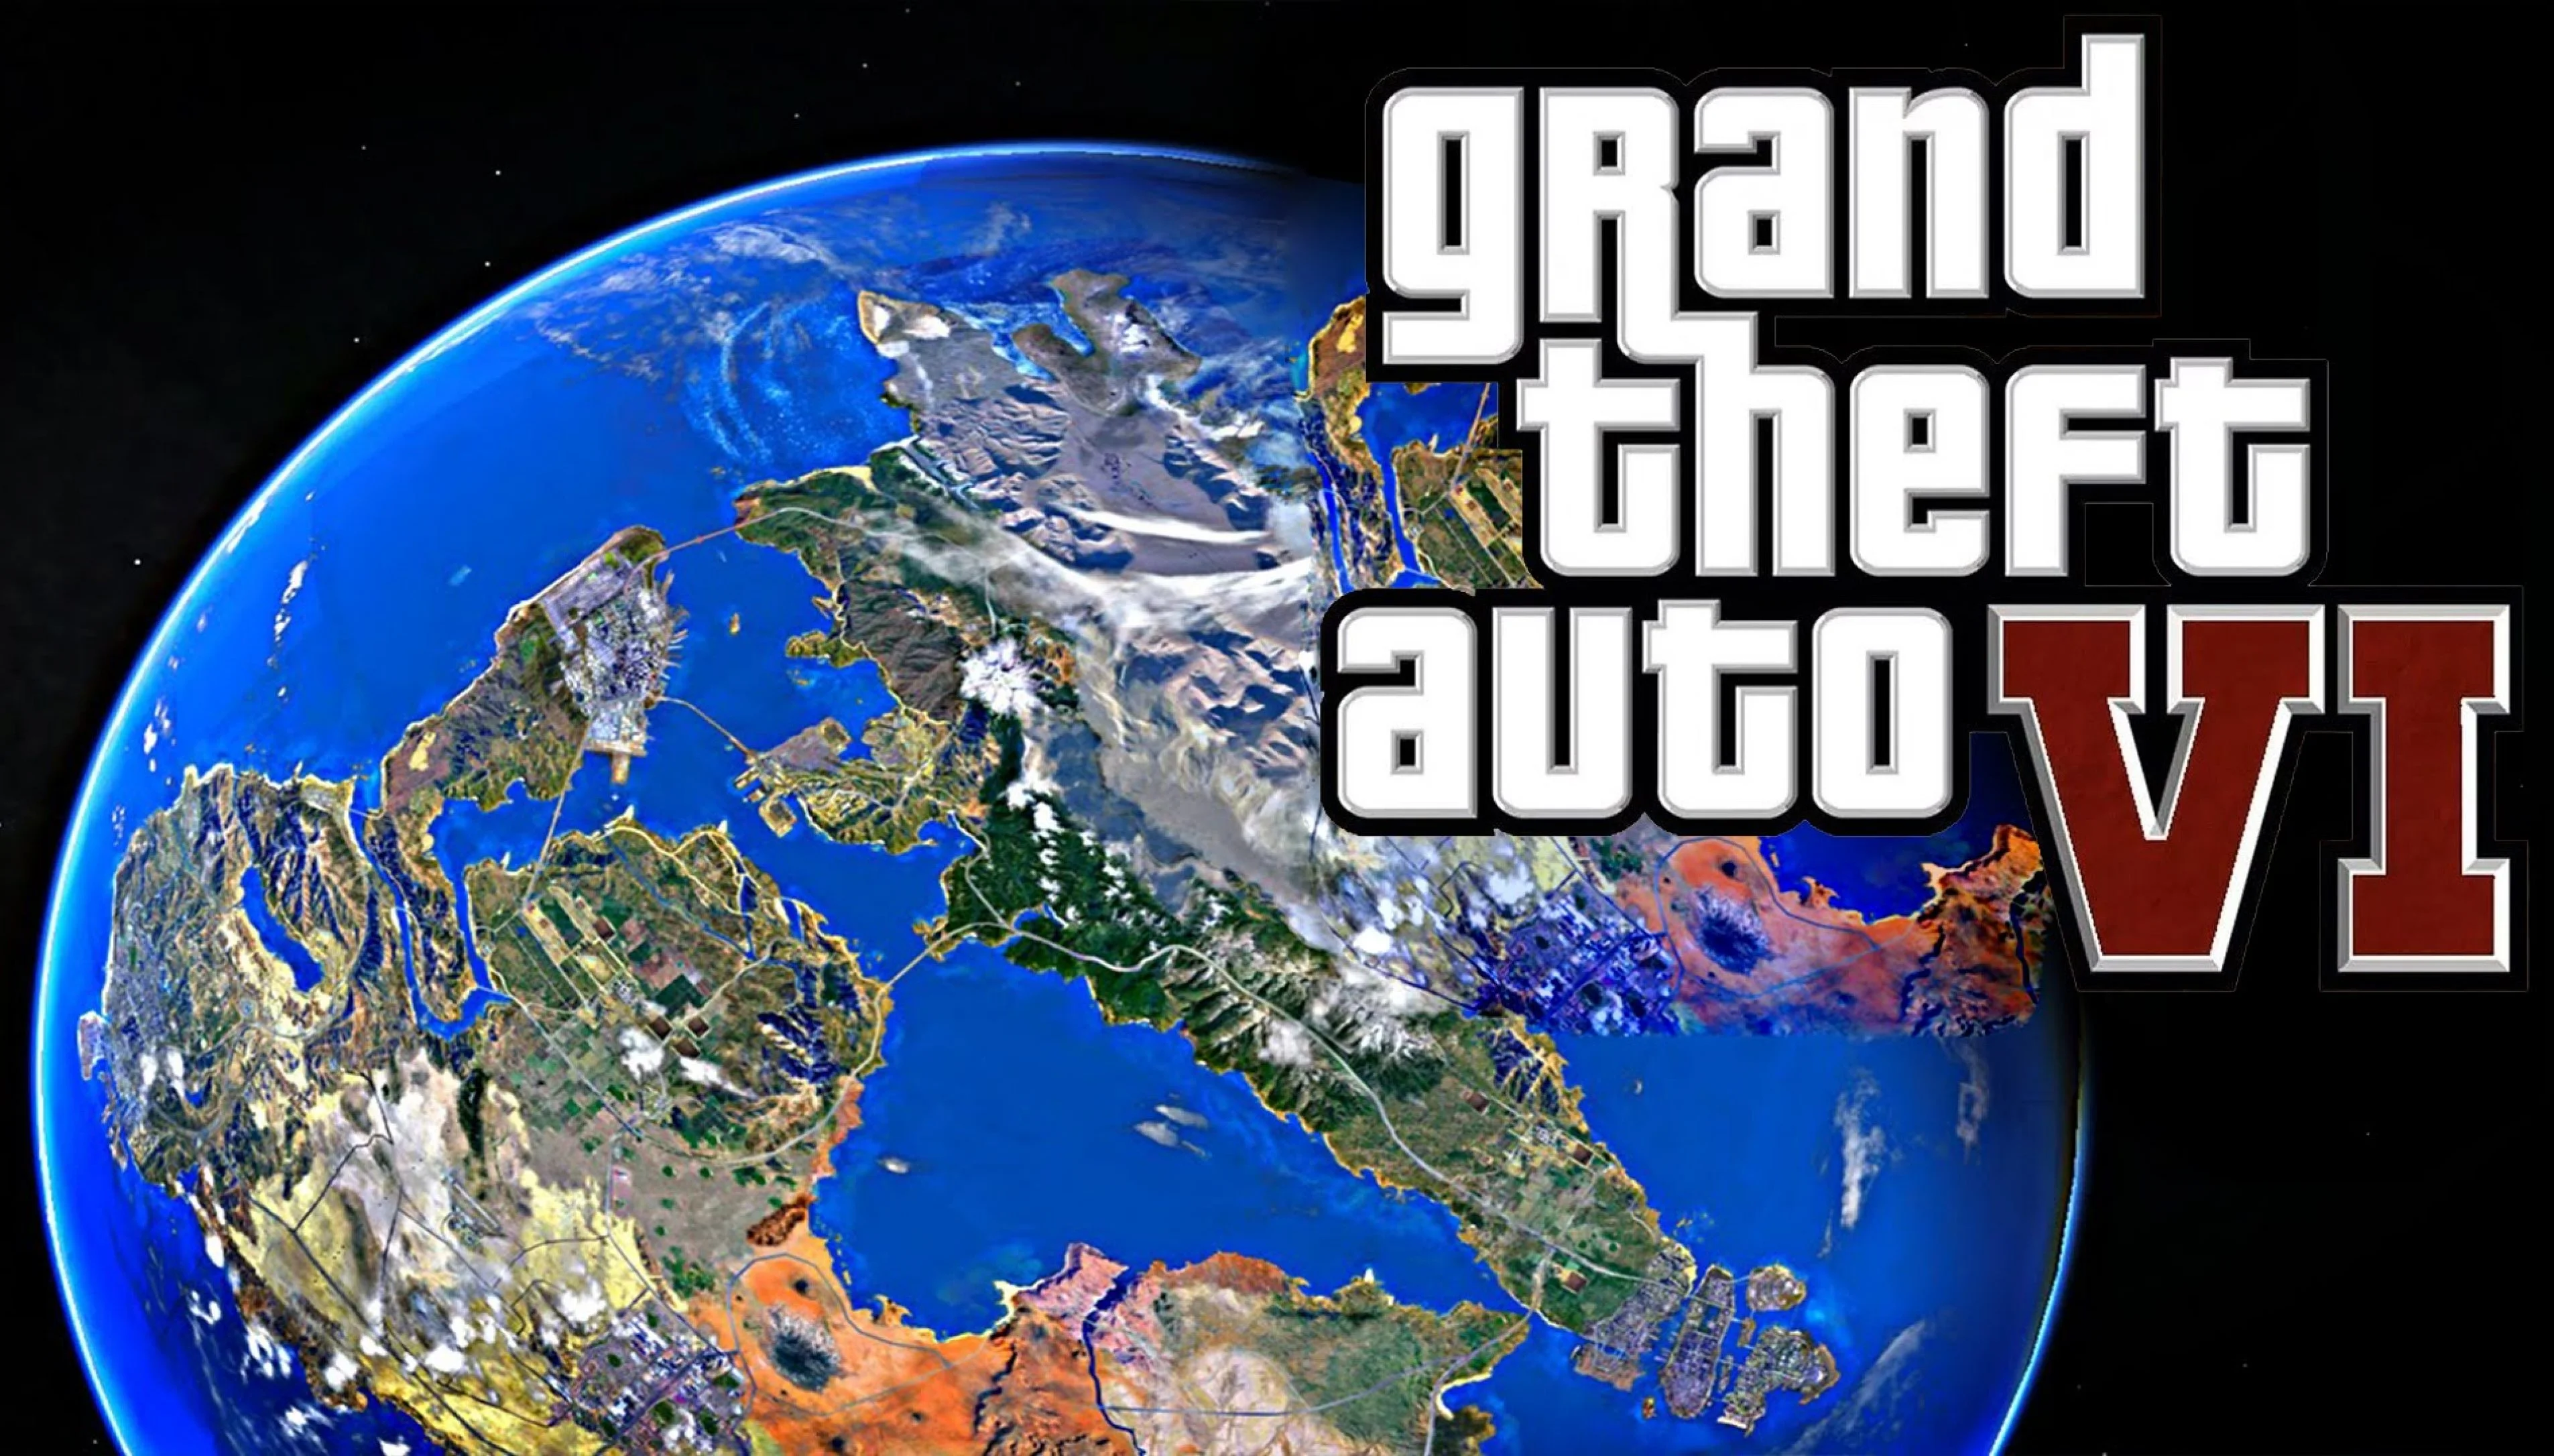 A fan posted a detailed map of GTA 6